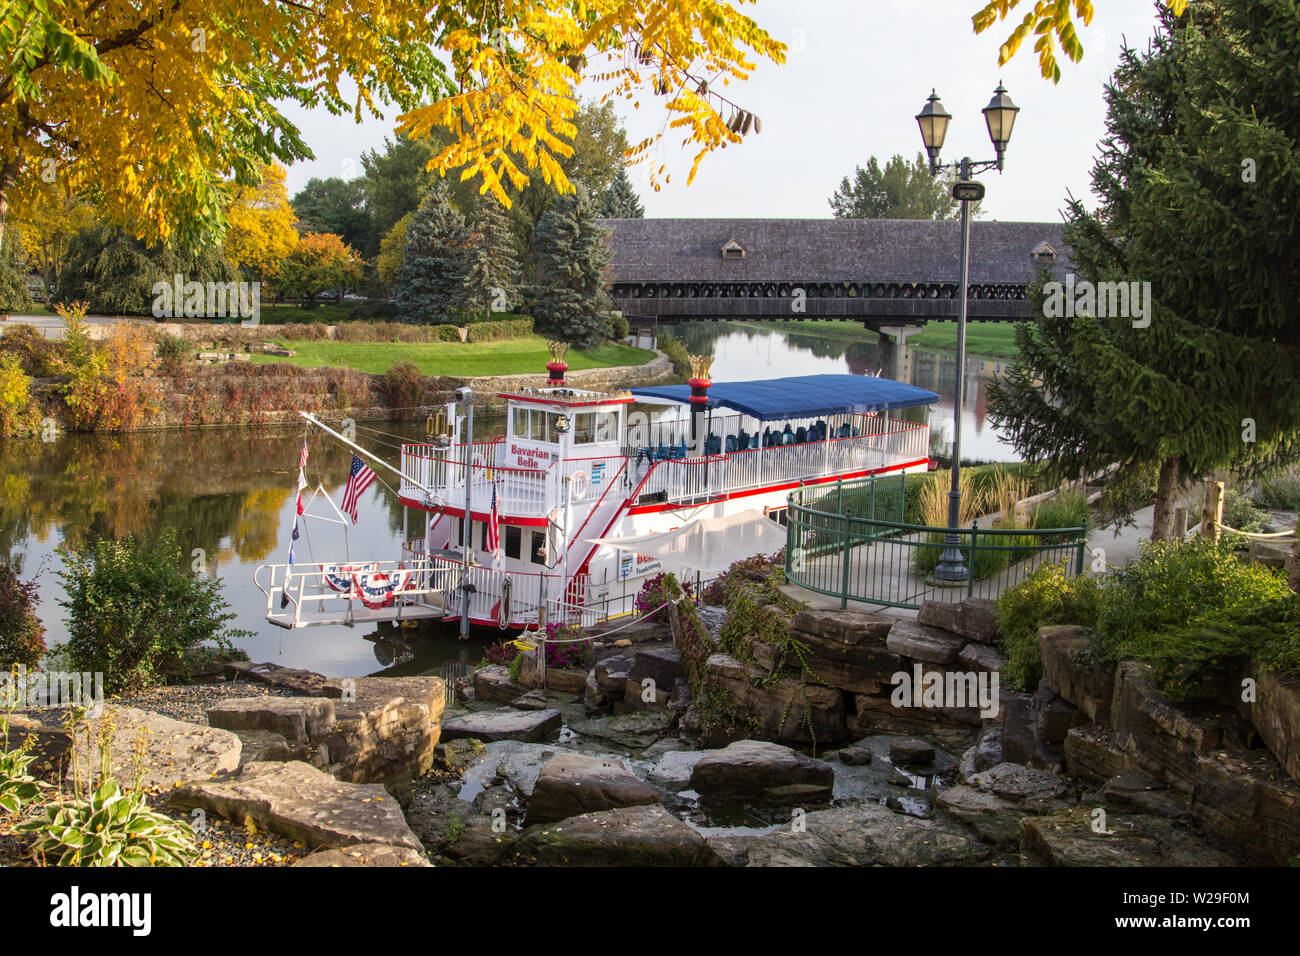 Frankenmuth, Michigan, USA - October 9, 2018: The Bavarian Belle riverboat offers sightseeing and dinner cruises on the Cass River in  Frankenmuth. Stock Photo